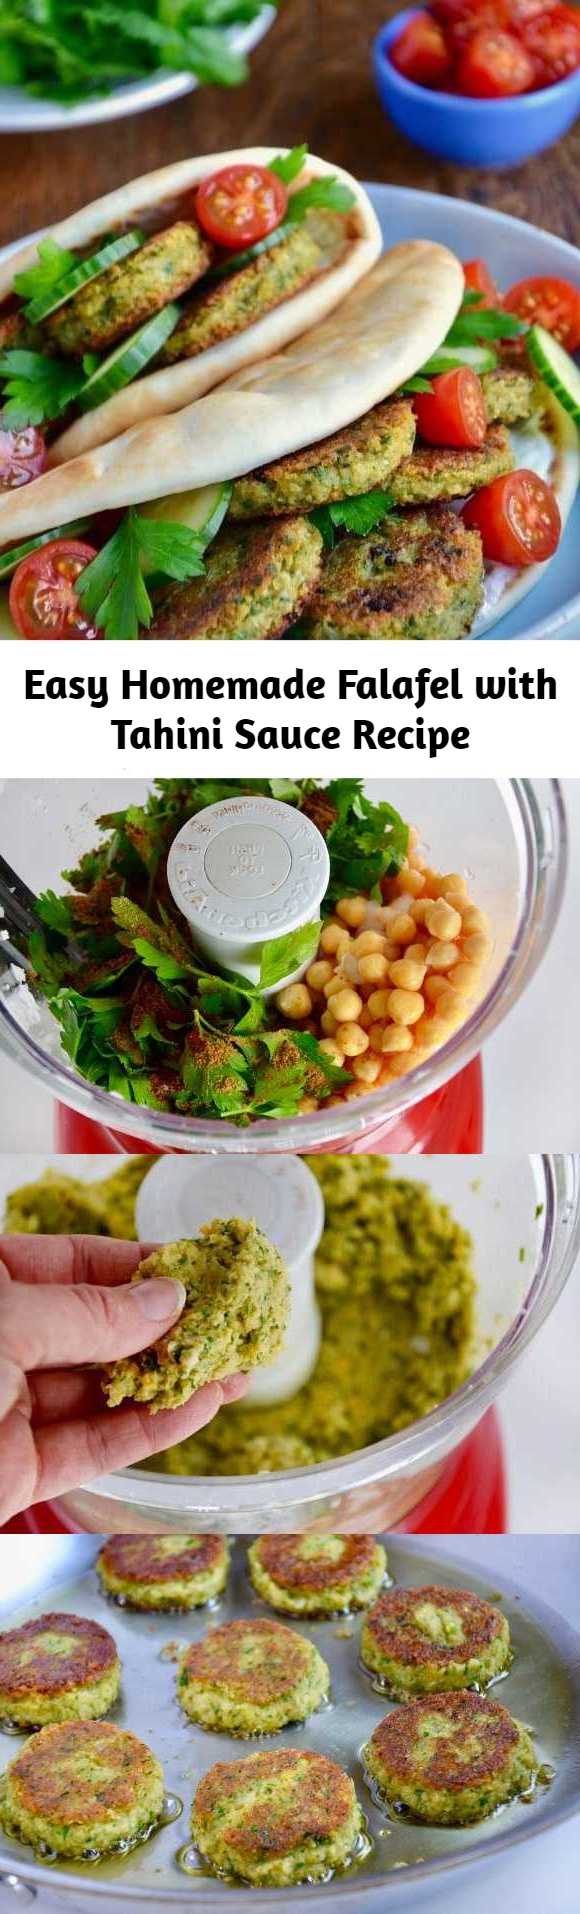 Easy Homemade Falafel with Tahini Sauce Recipe - A restaurant favorite gets a DIY makeover with this top-rated recipe for easy Homemade Falafel with Tahini Sauce.